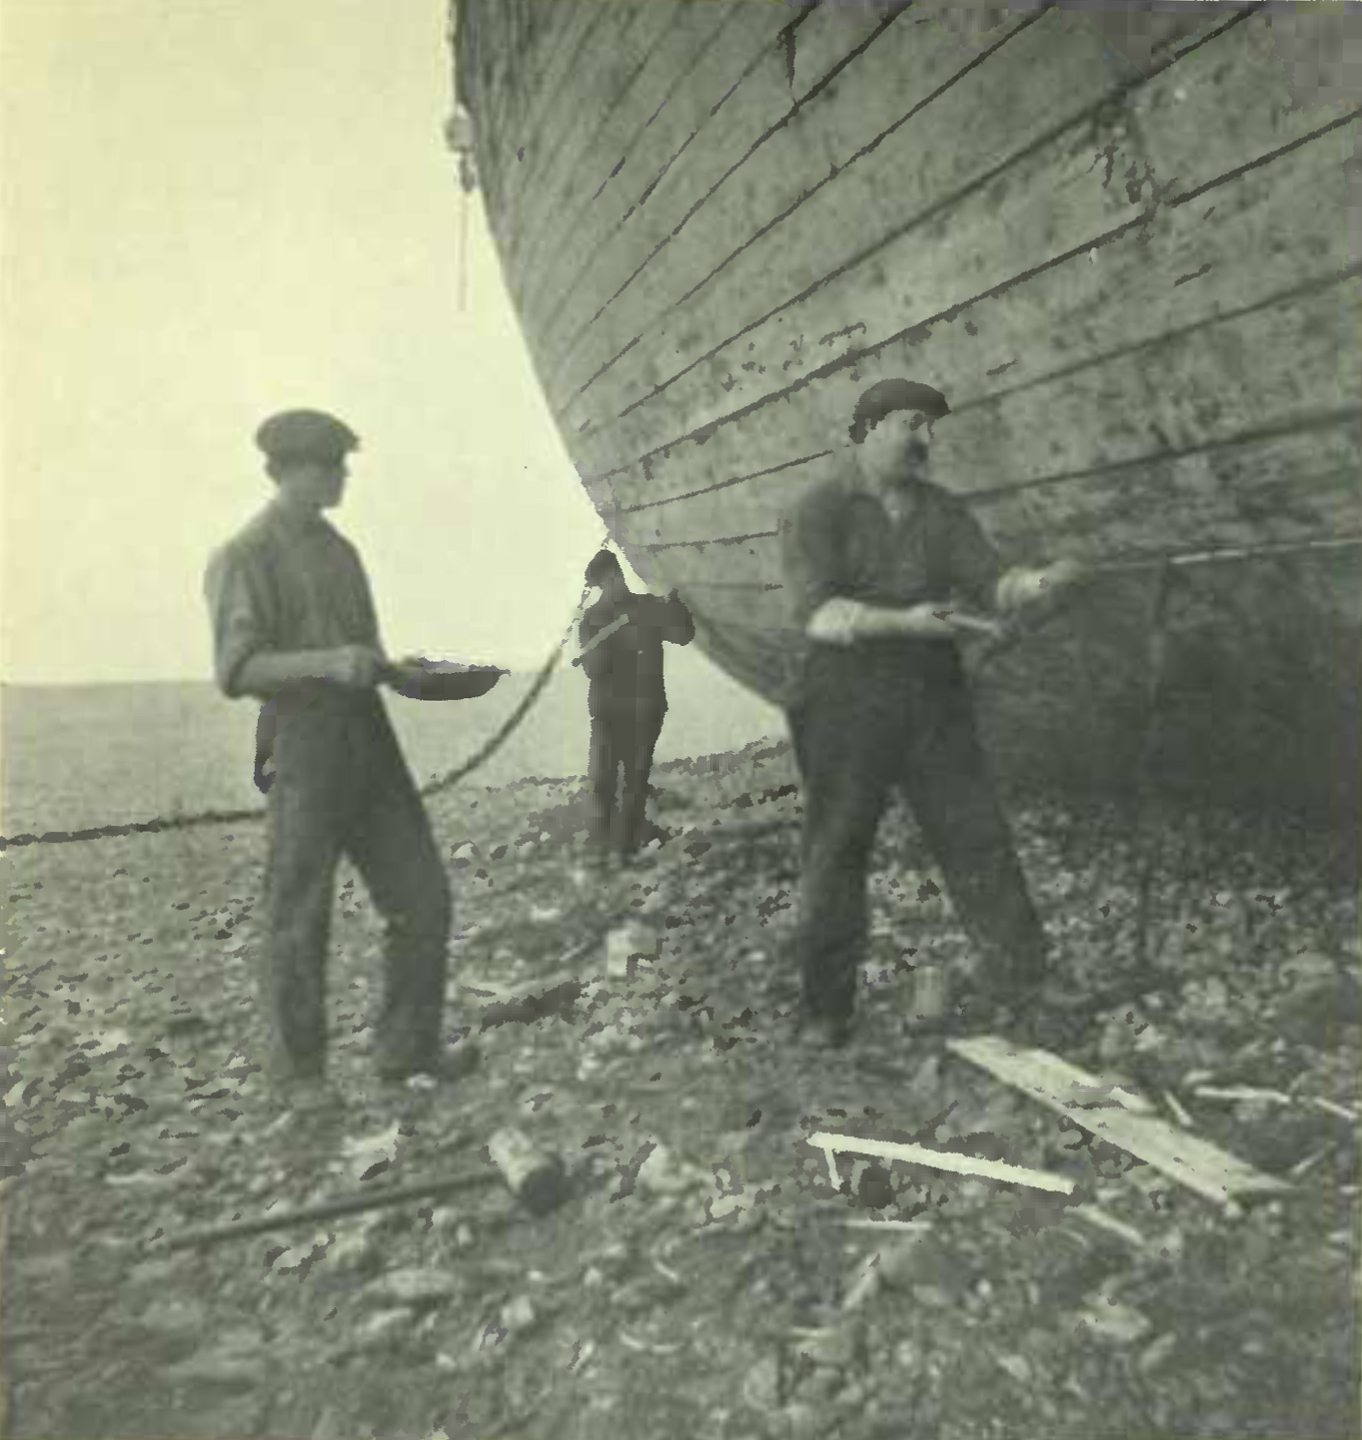 Three men tending to the side of a very tall boat.